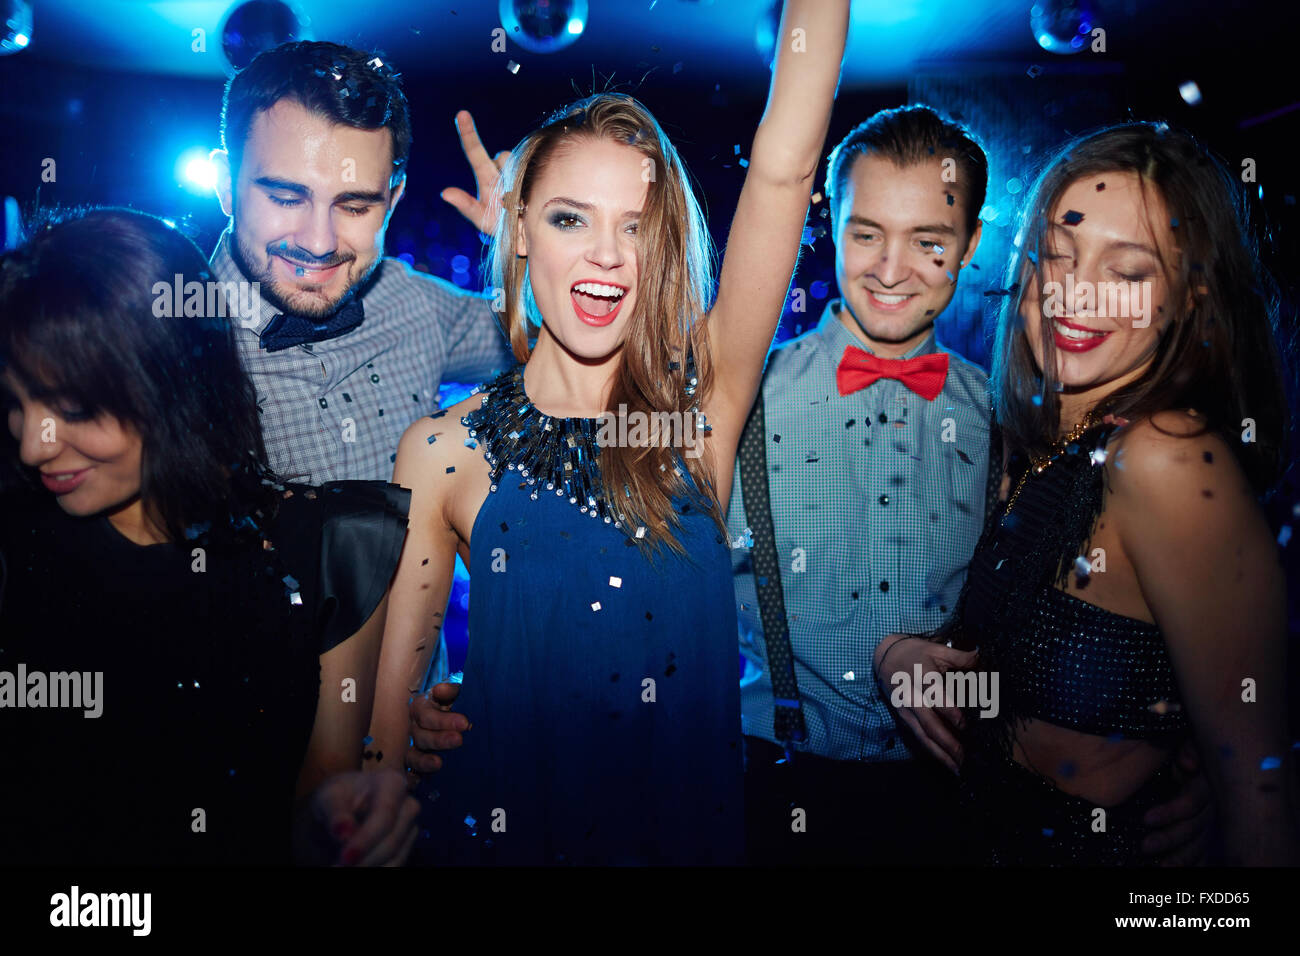 Coole party Stockfoto